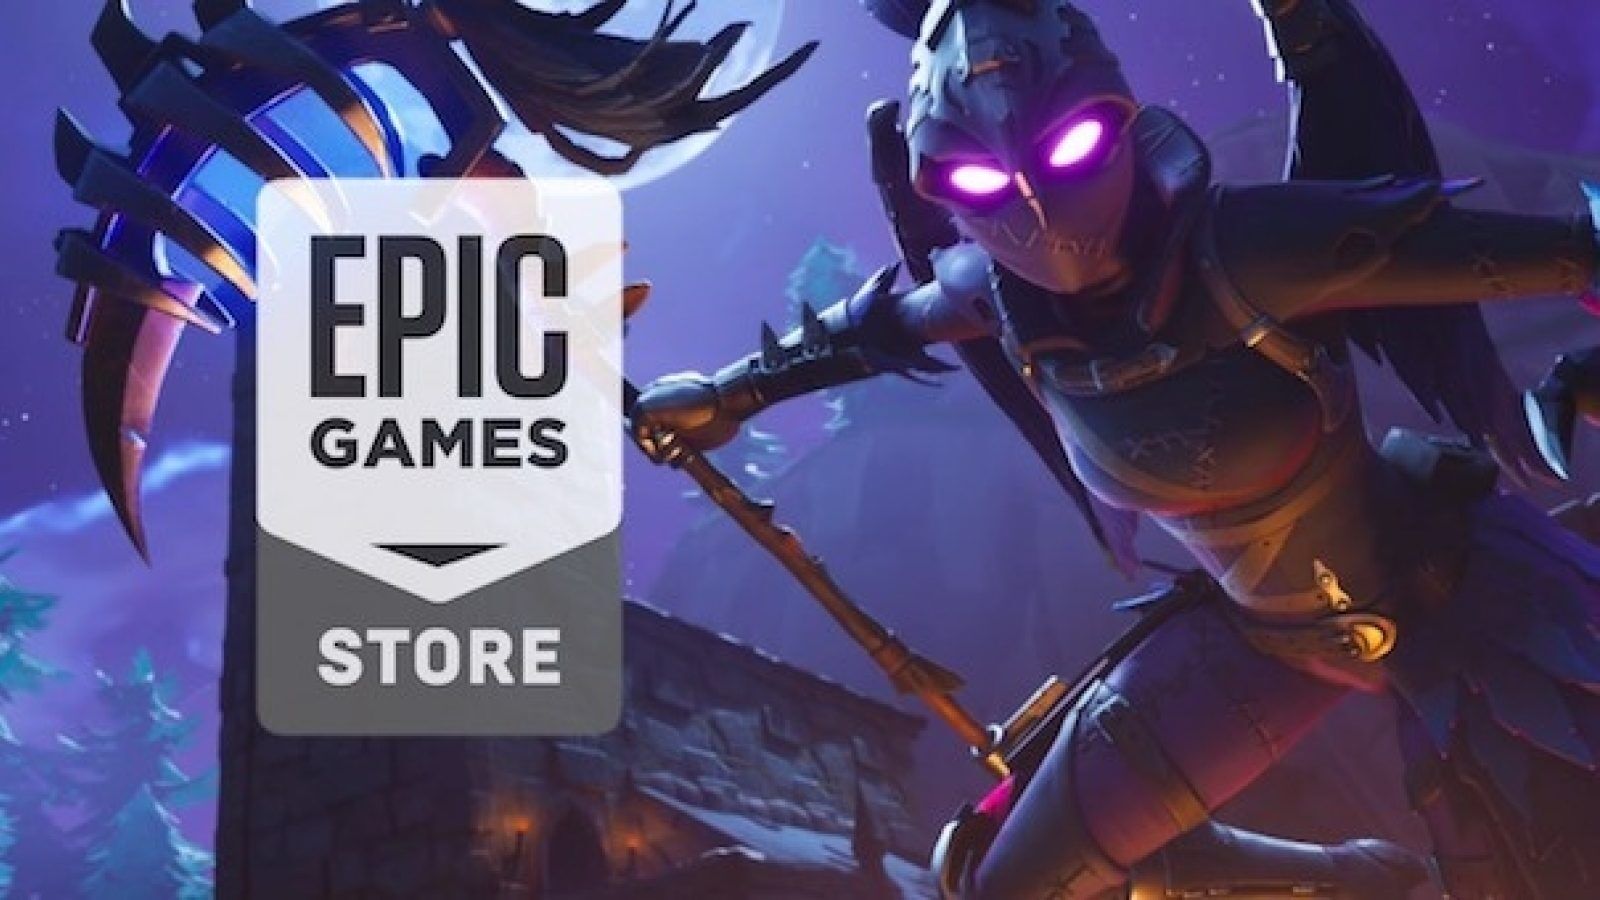 Epic Games Store Announces Free Games Galore This Xmas - Gaming Yeeter